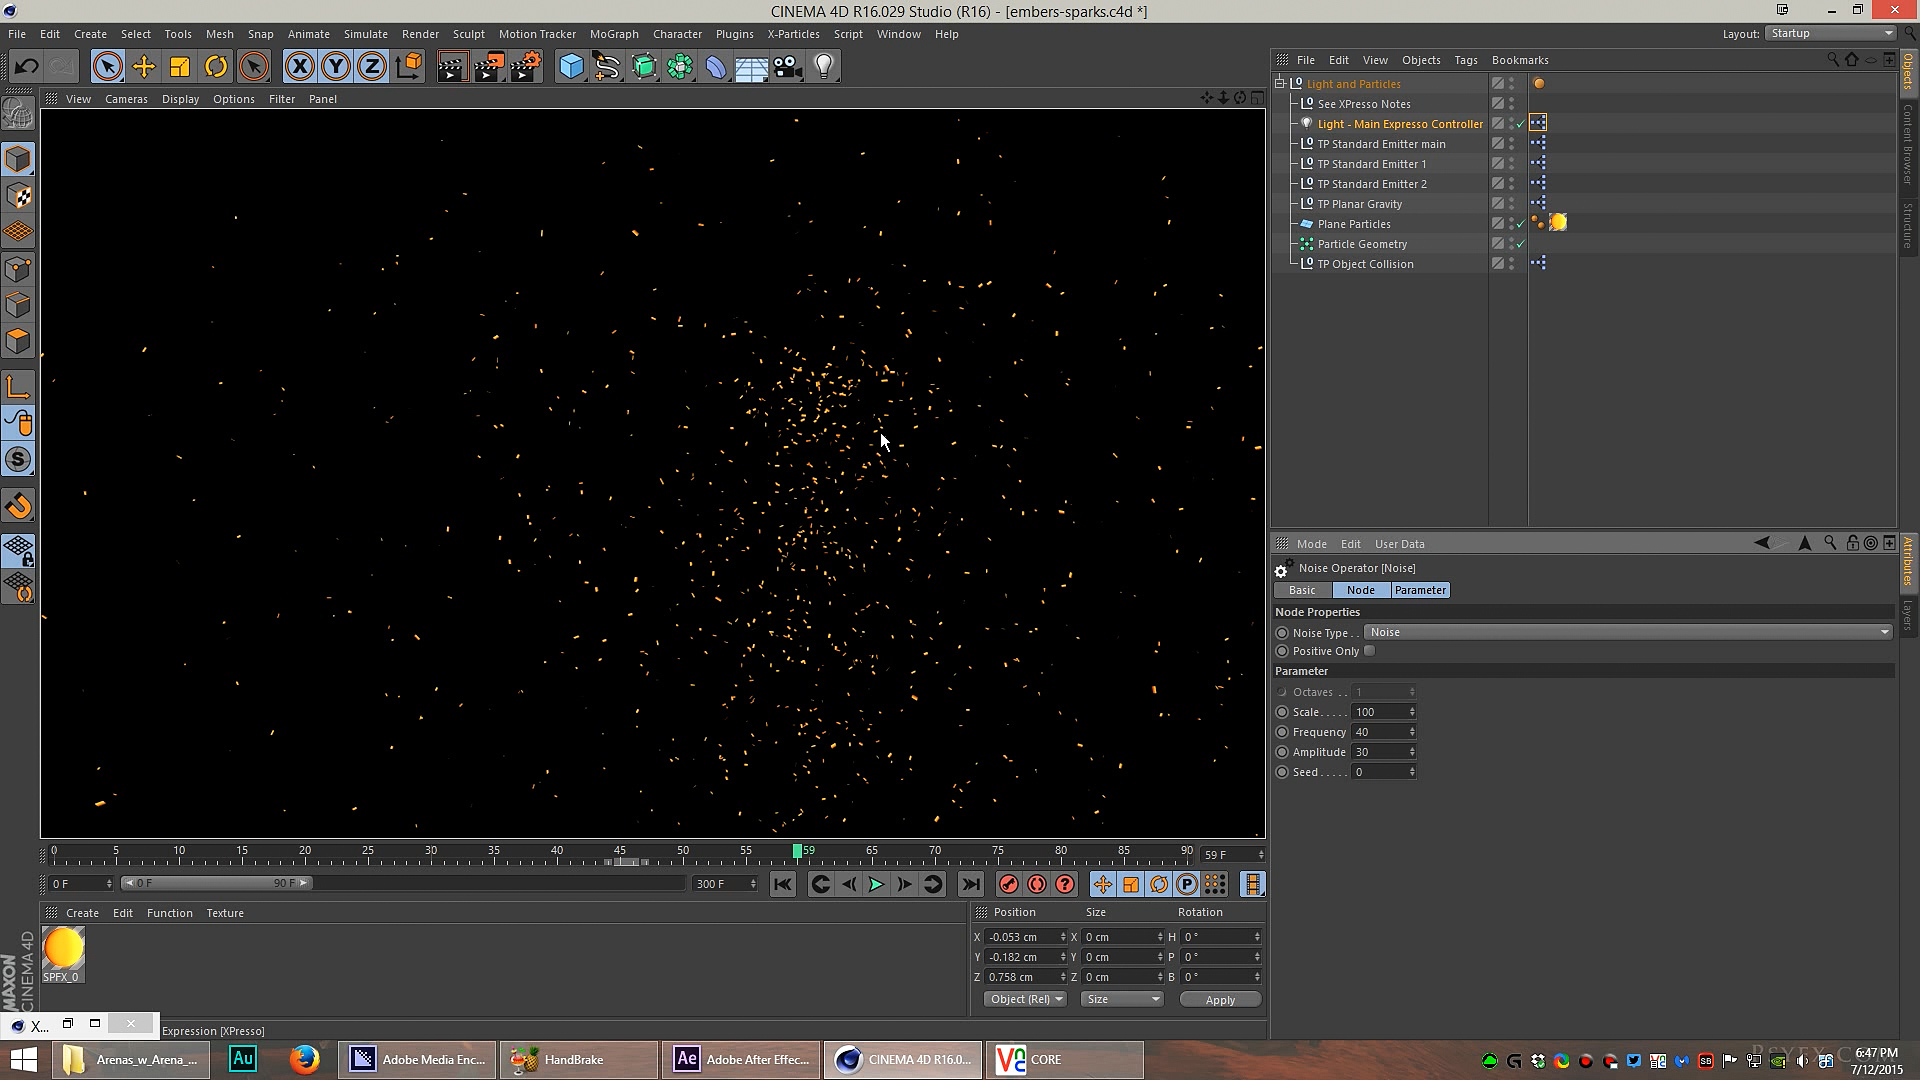 Fire Embers, Snow, and Particles in AE and C4D  [DOWNLOAD]